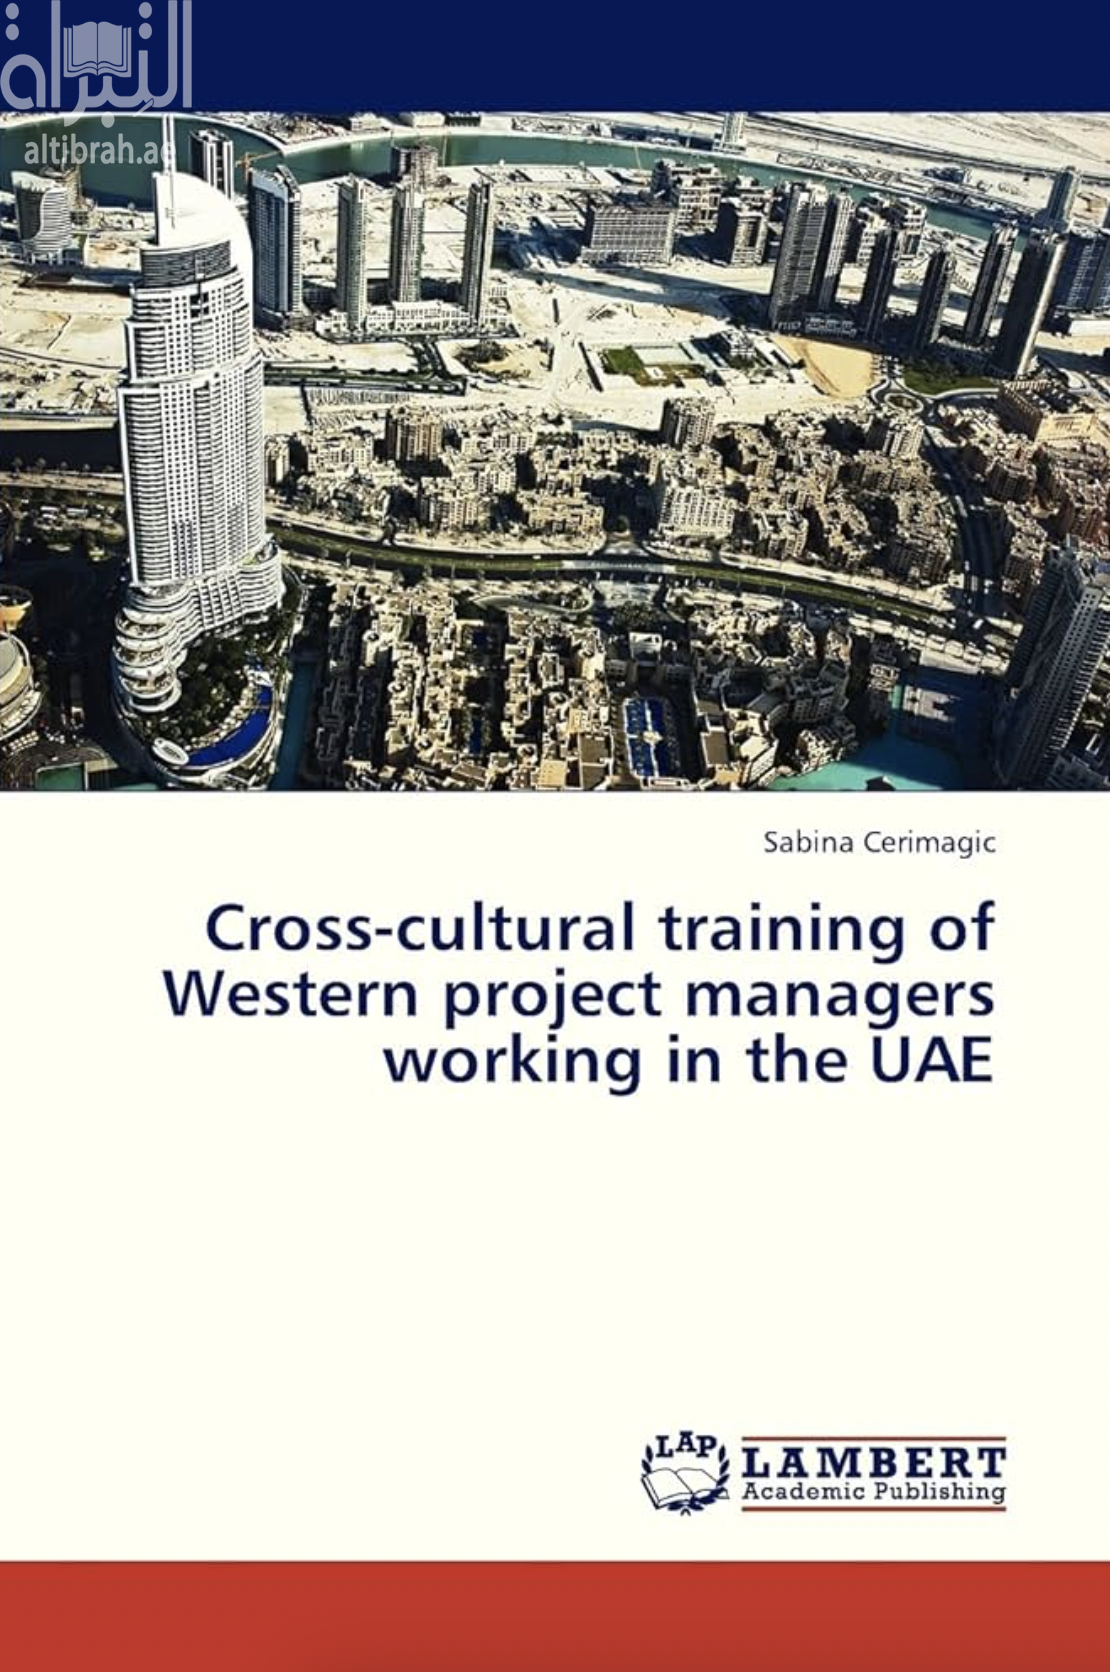 Cross-cultural training of Western project managers working in the UAE